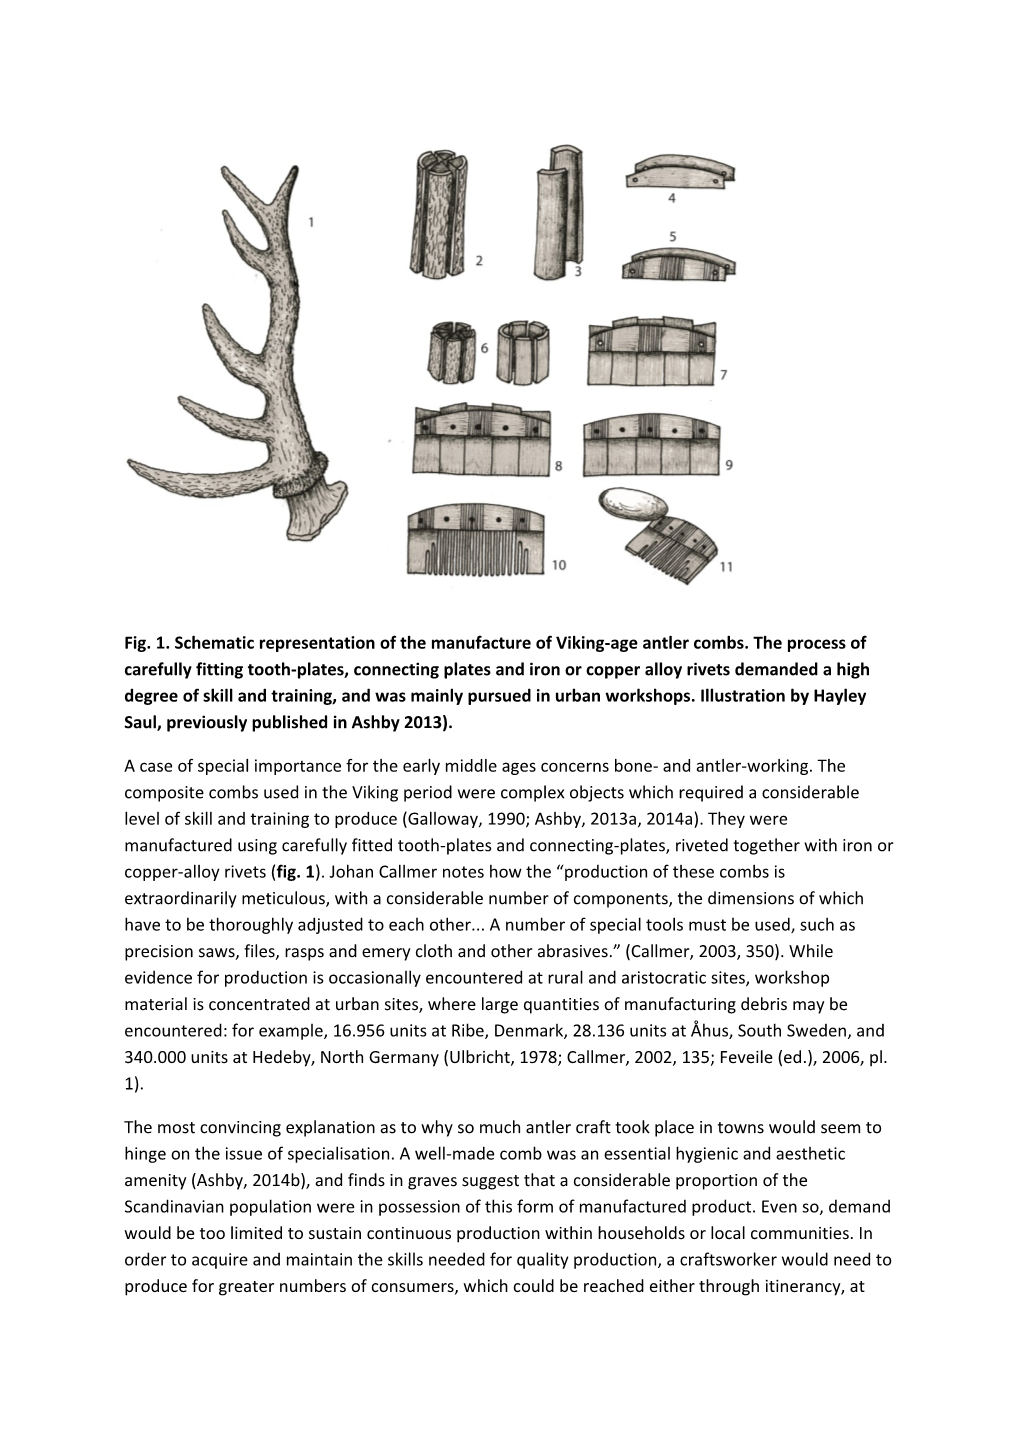 Craft Specialists and Reindeer Antler in Viking Towns